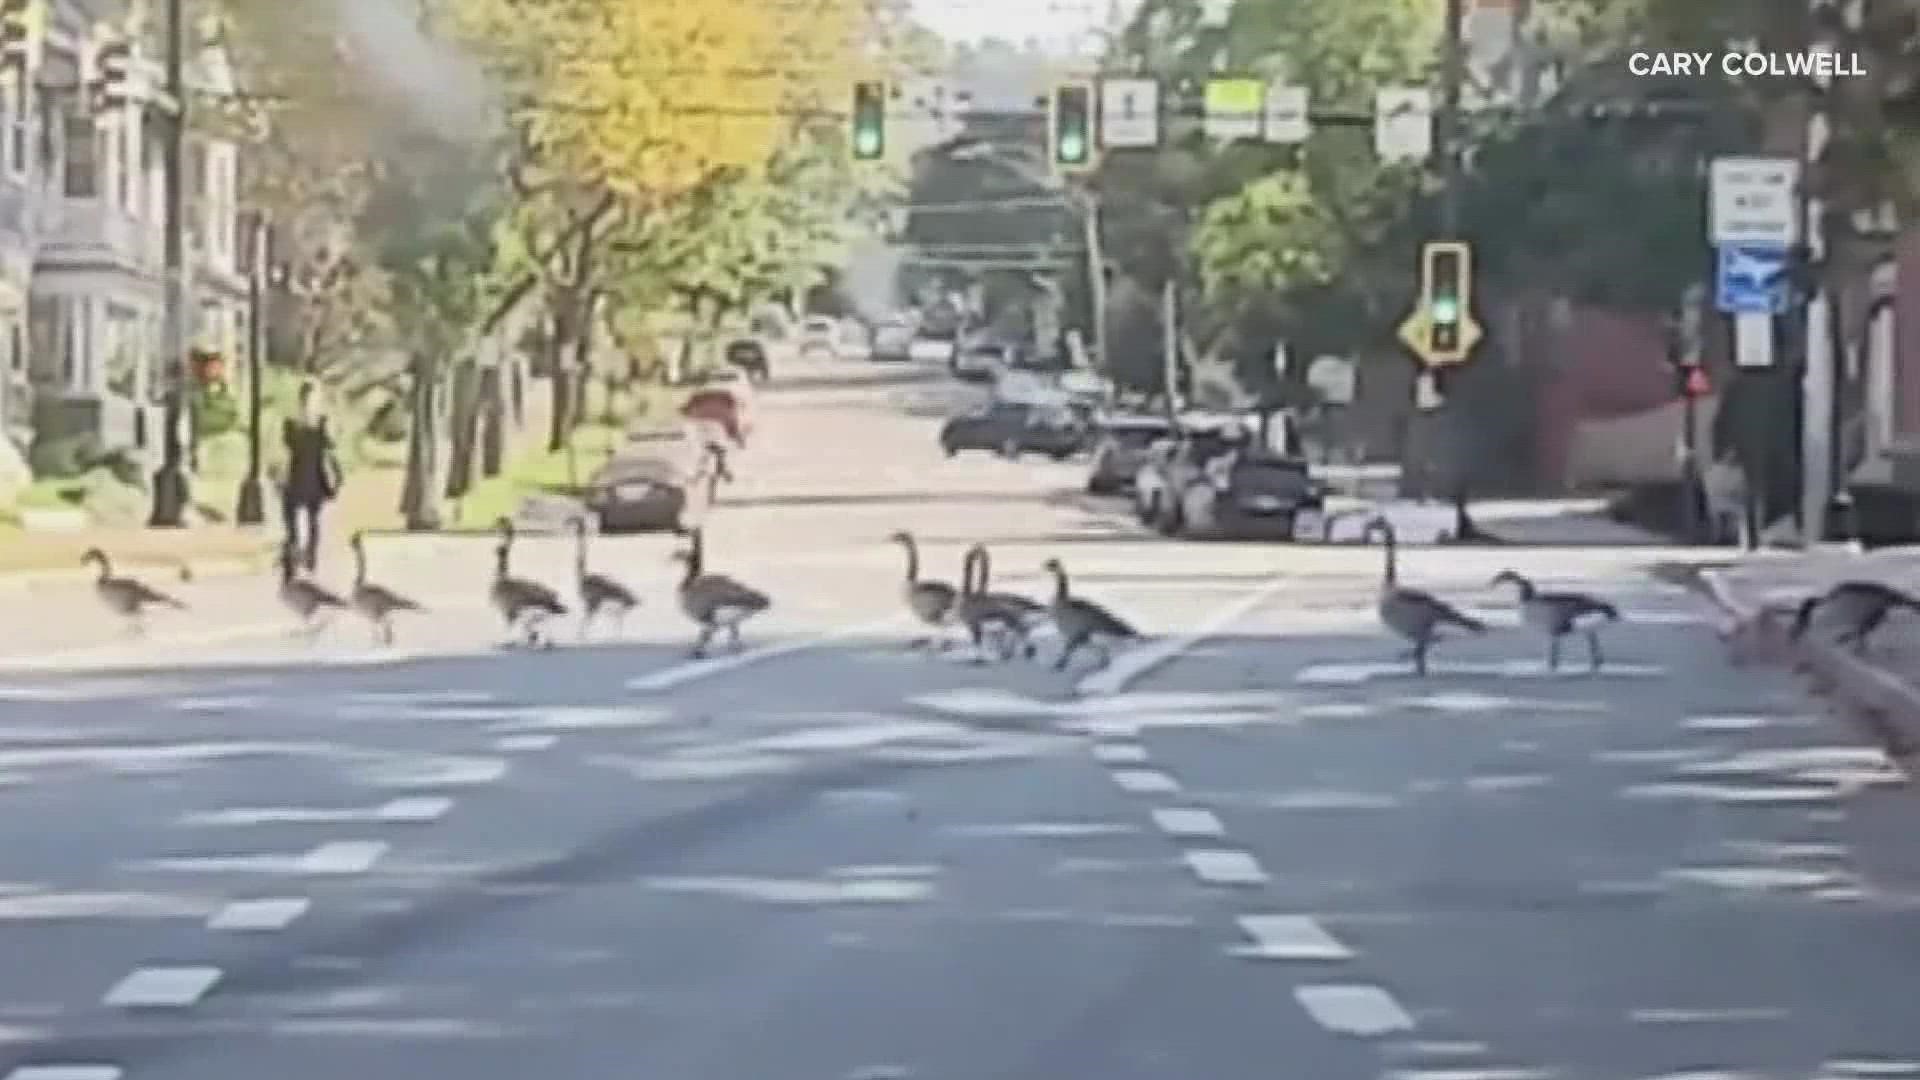 Silly goose! Get out of the road! These geese held up traffic on High Street in Portland Wednesday, but luckily they made it across safely.